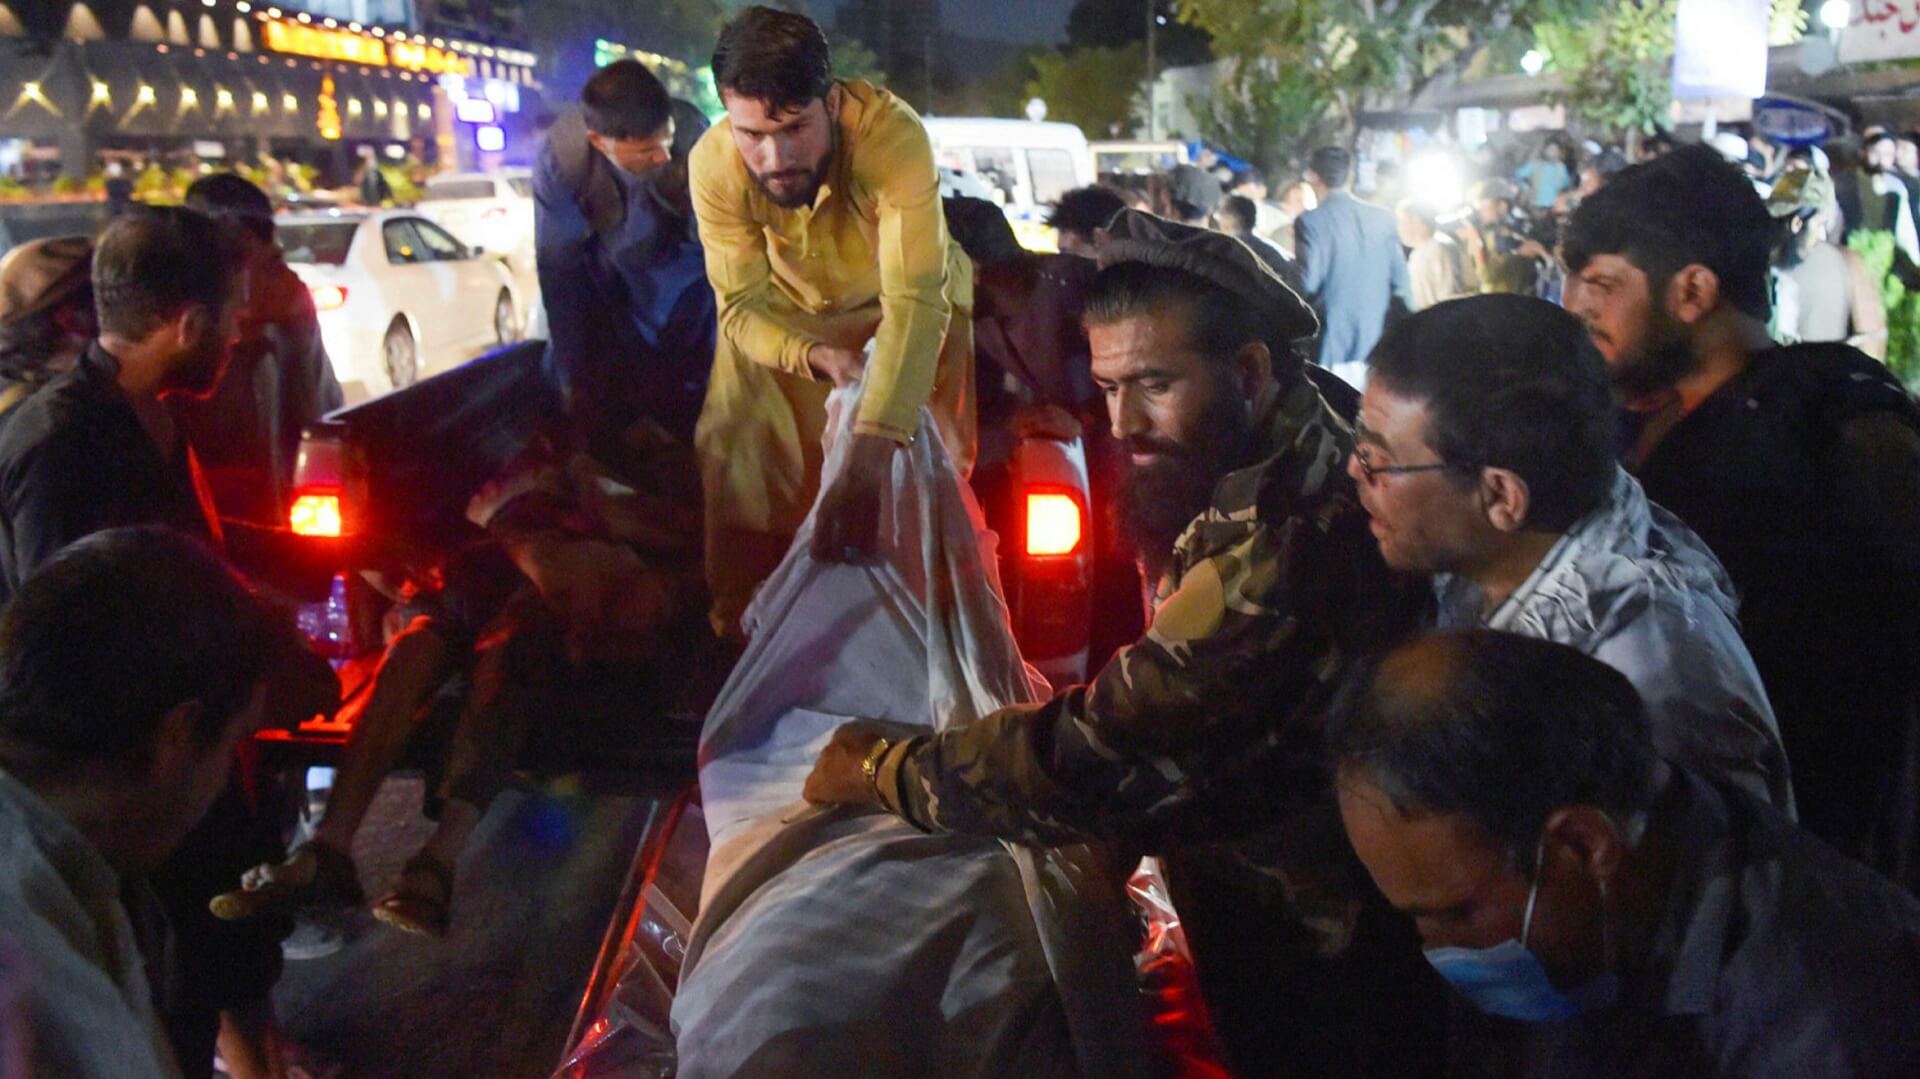 Kabul Airport Suicide Blast Kills 73, Including US Troops, IS Claims Responsibility